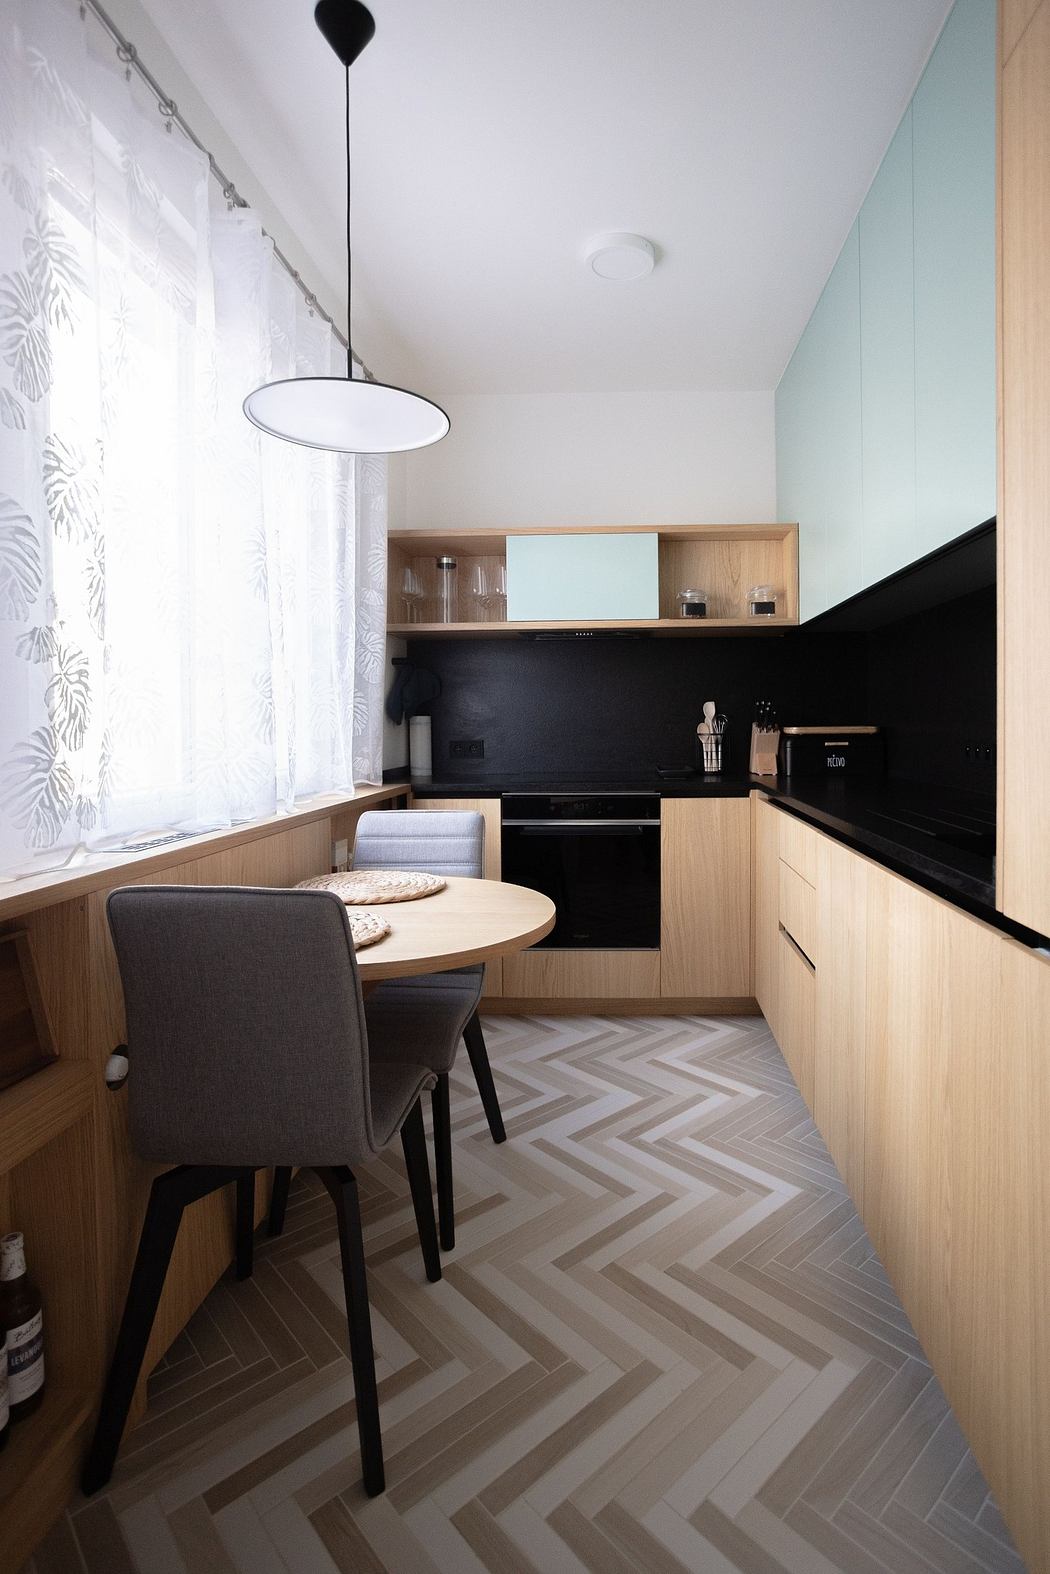 Modern kitchen interior with light wood cabinets and chevron floor.